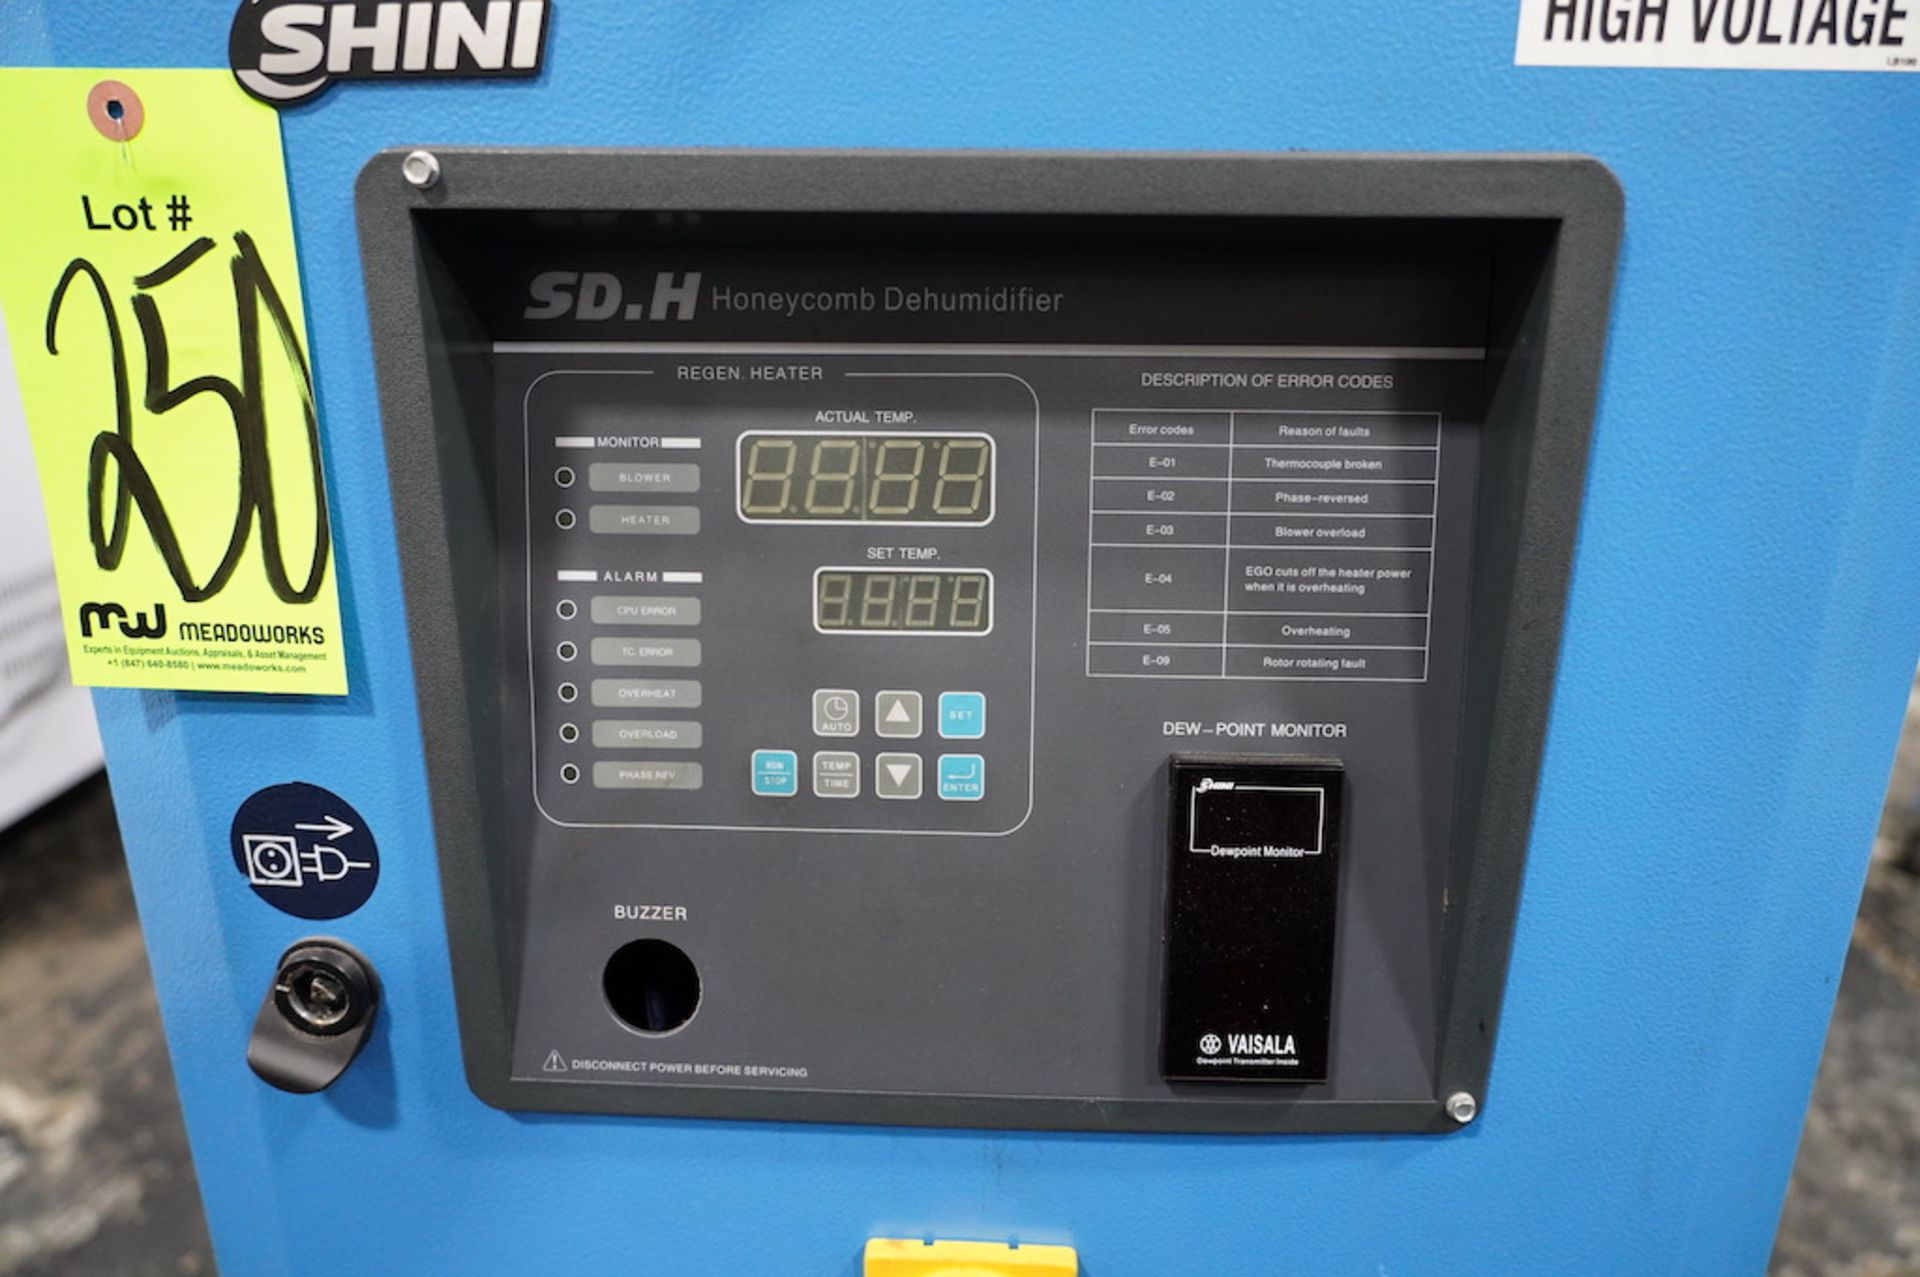 Shini SD-80H-P-D-UL Material Dryer, New in 2013 - Image 4 of 6